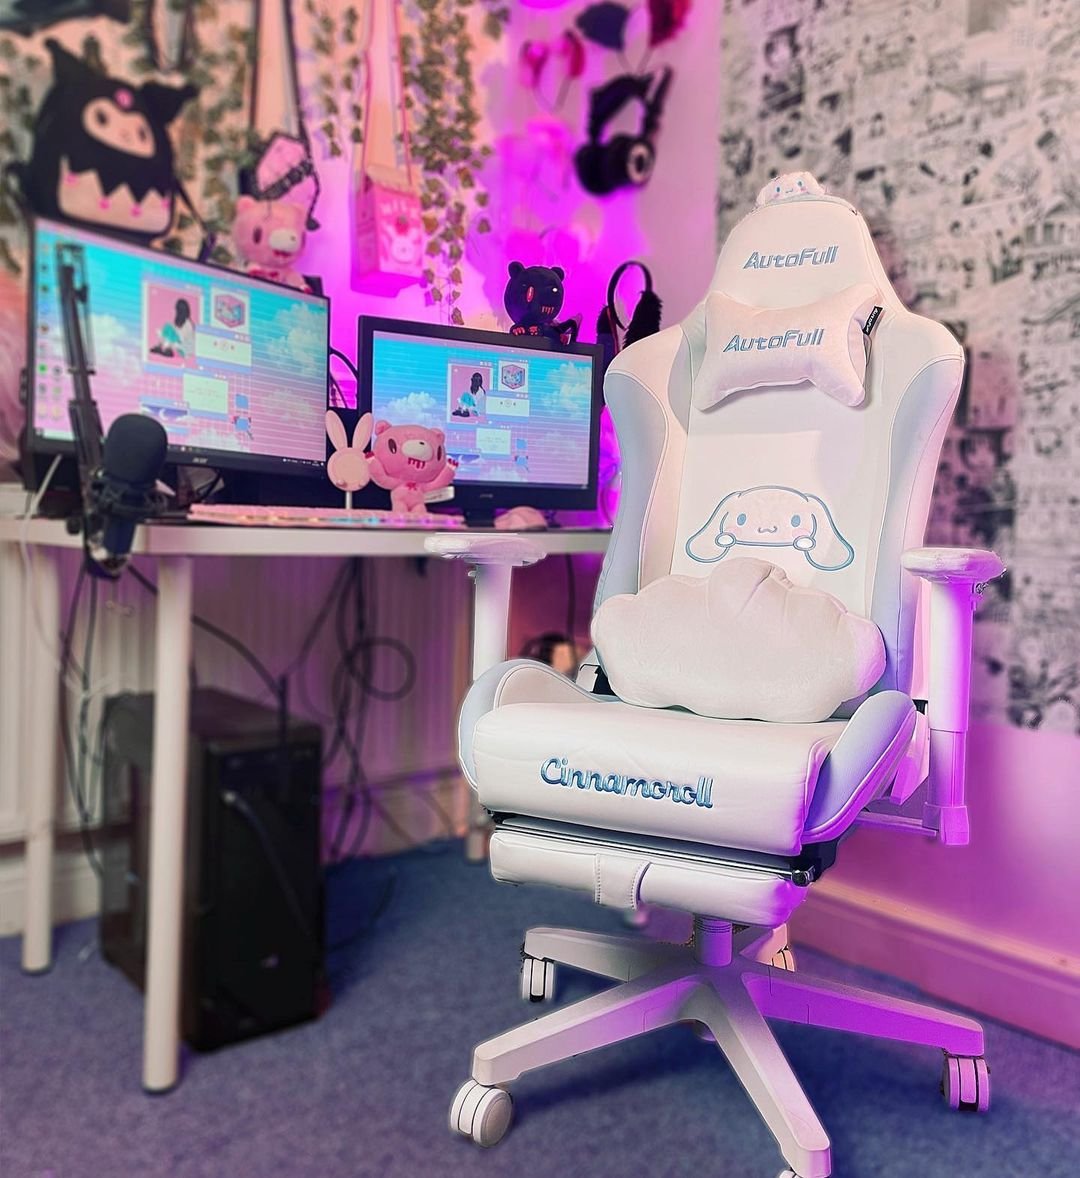 Gaming Chair with Footrest - Autofull Ergonomic Gaming Chair 